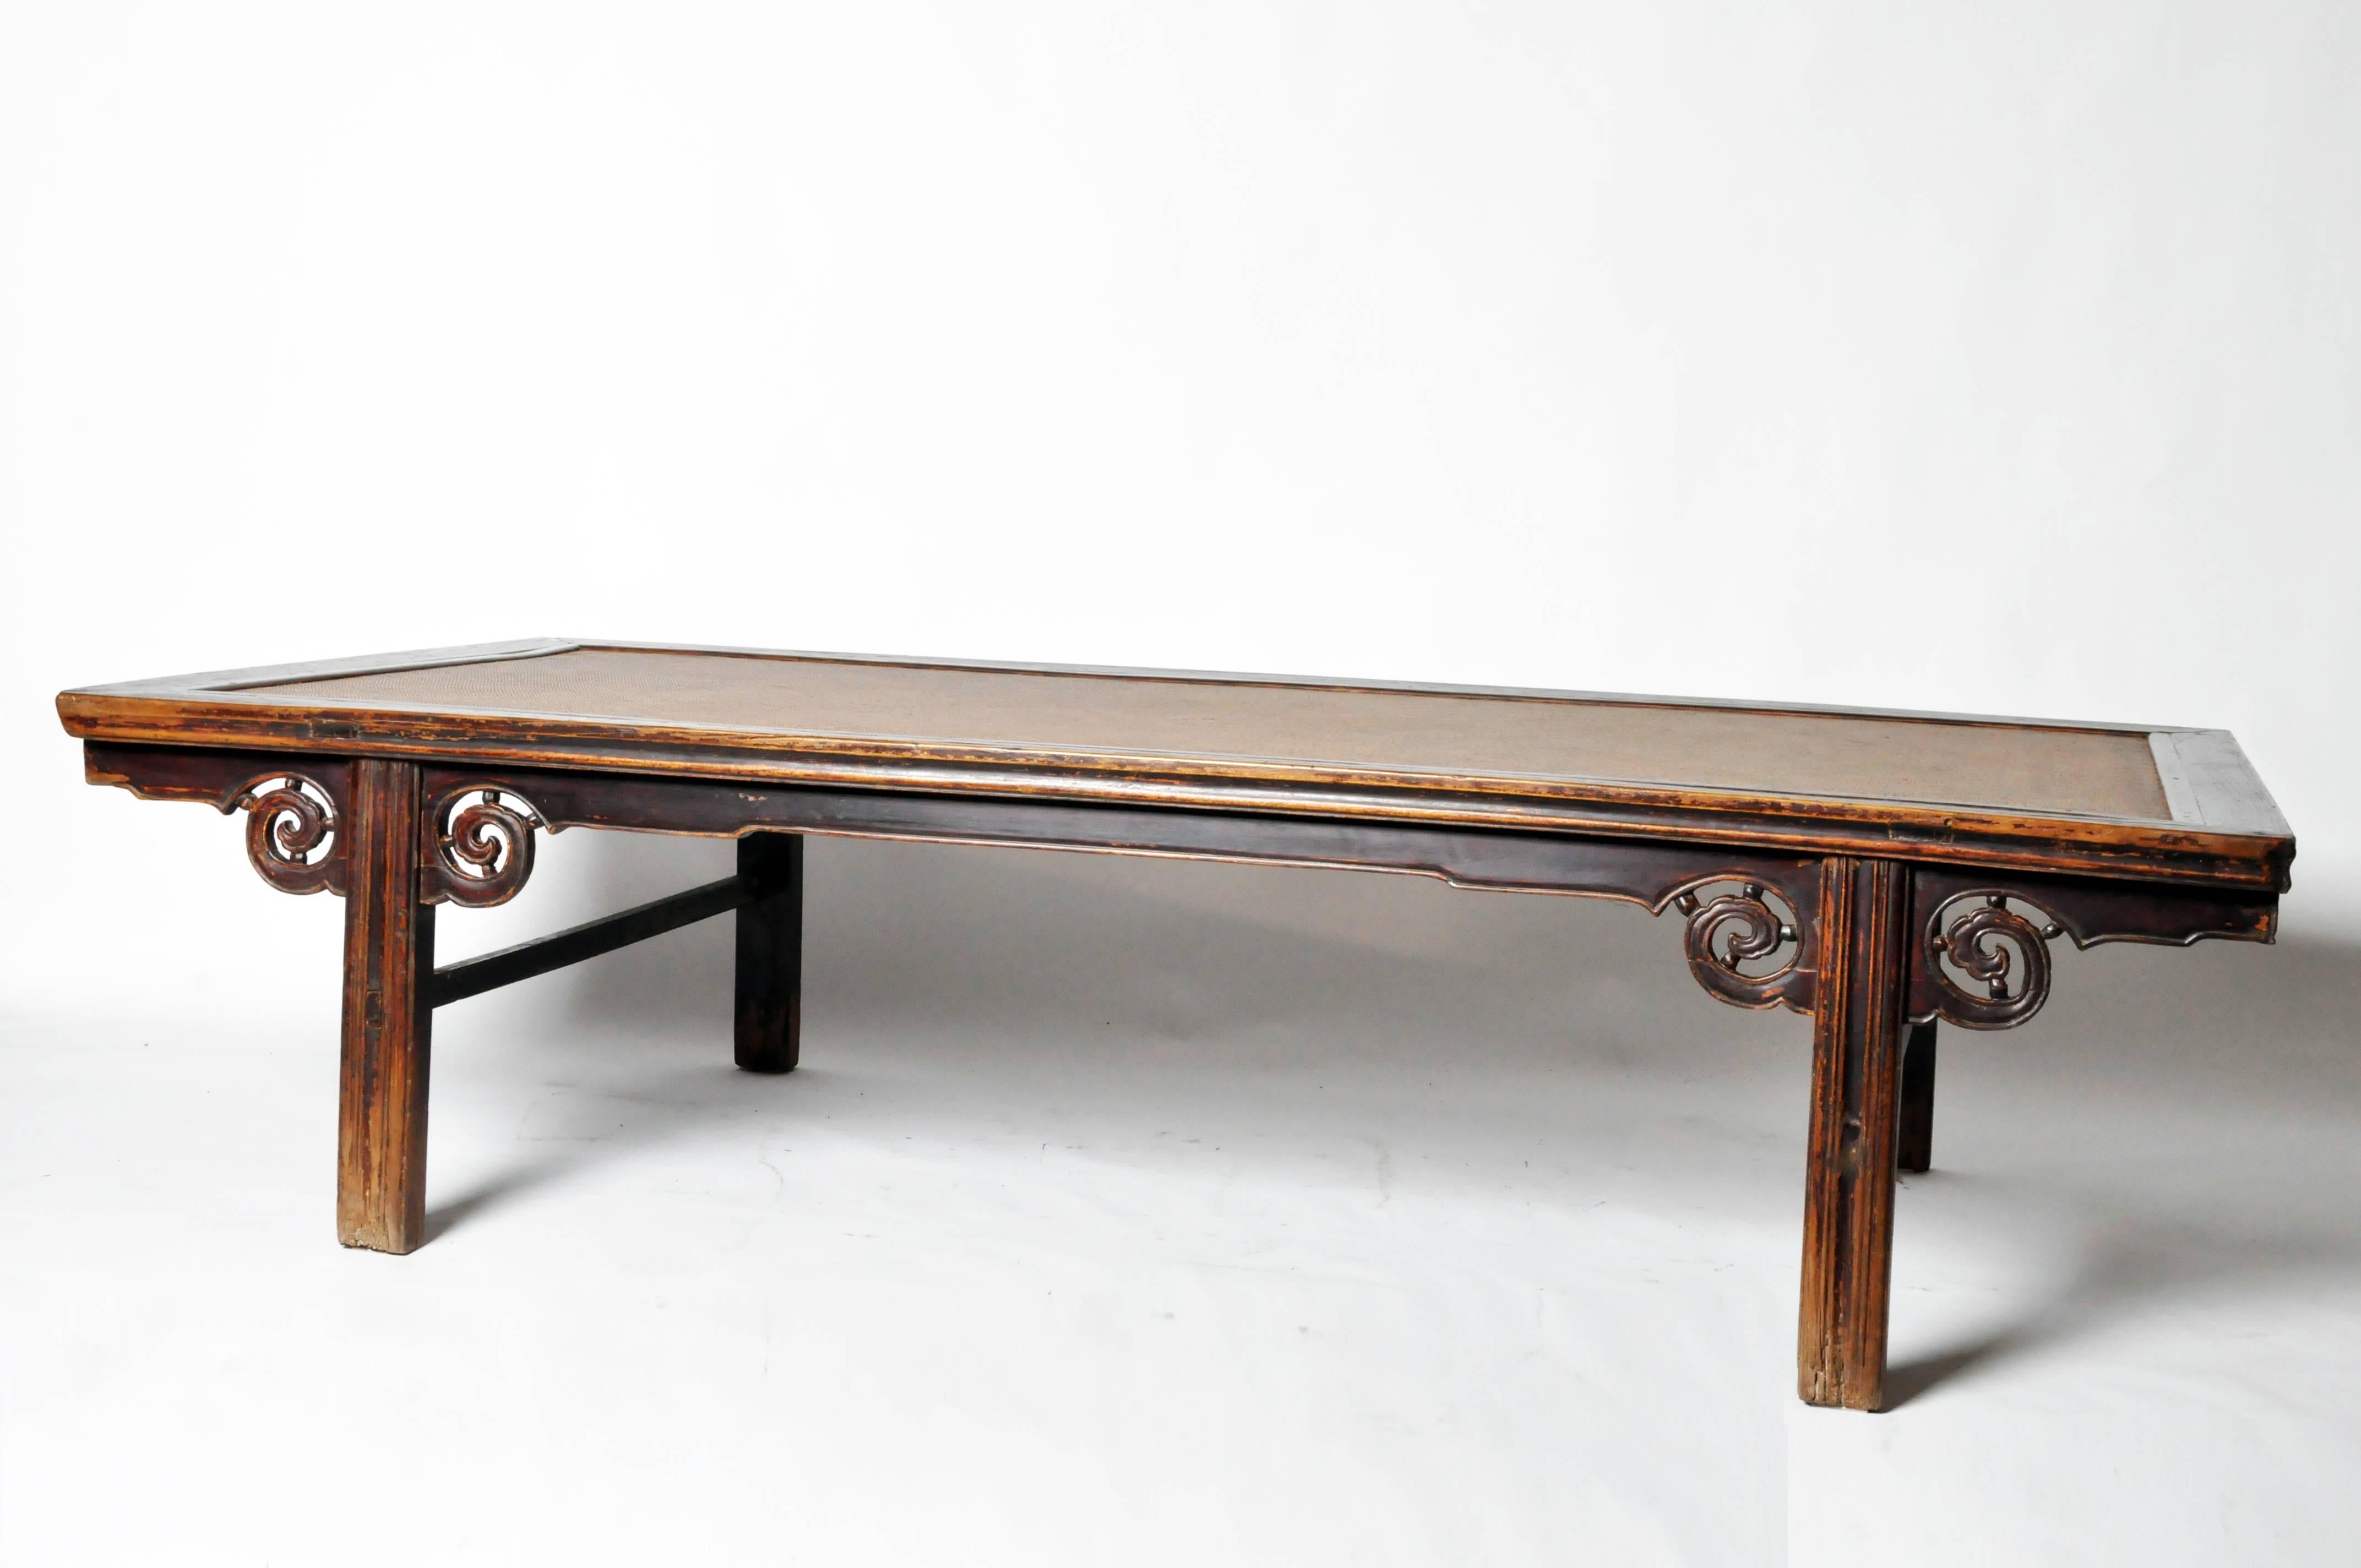 A Kang table—also referred to as a bench—is a type of Chinese furniture that serves a Dual purpose as both a low table and a chair-level bed. This particular example has a rattan top, cloud motif apron-head spandrels with beading and square legs